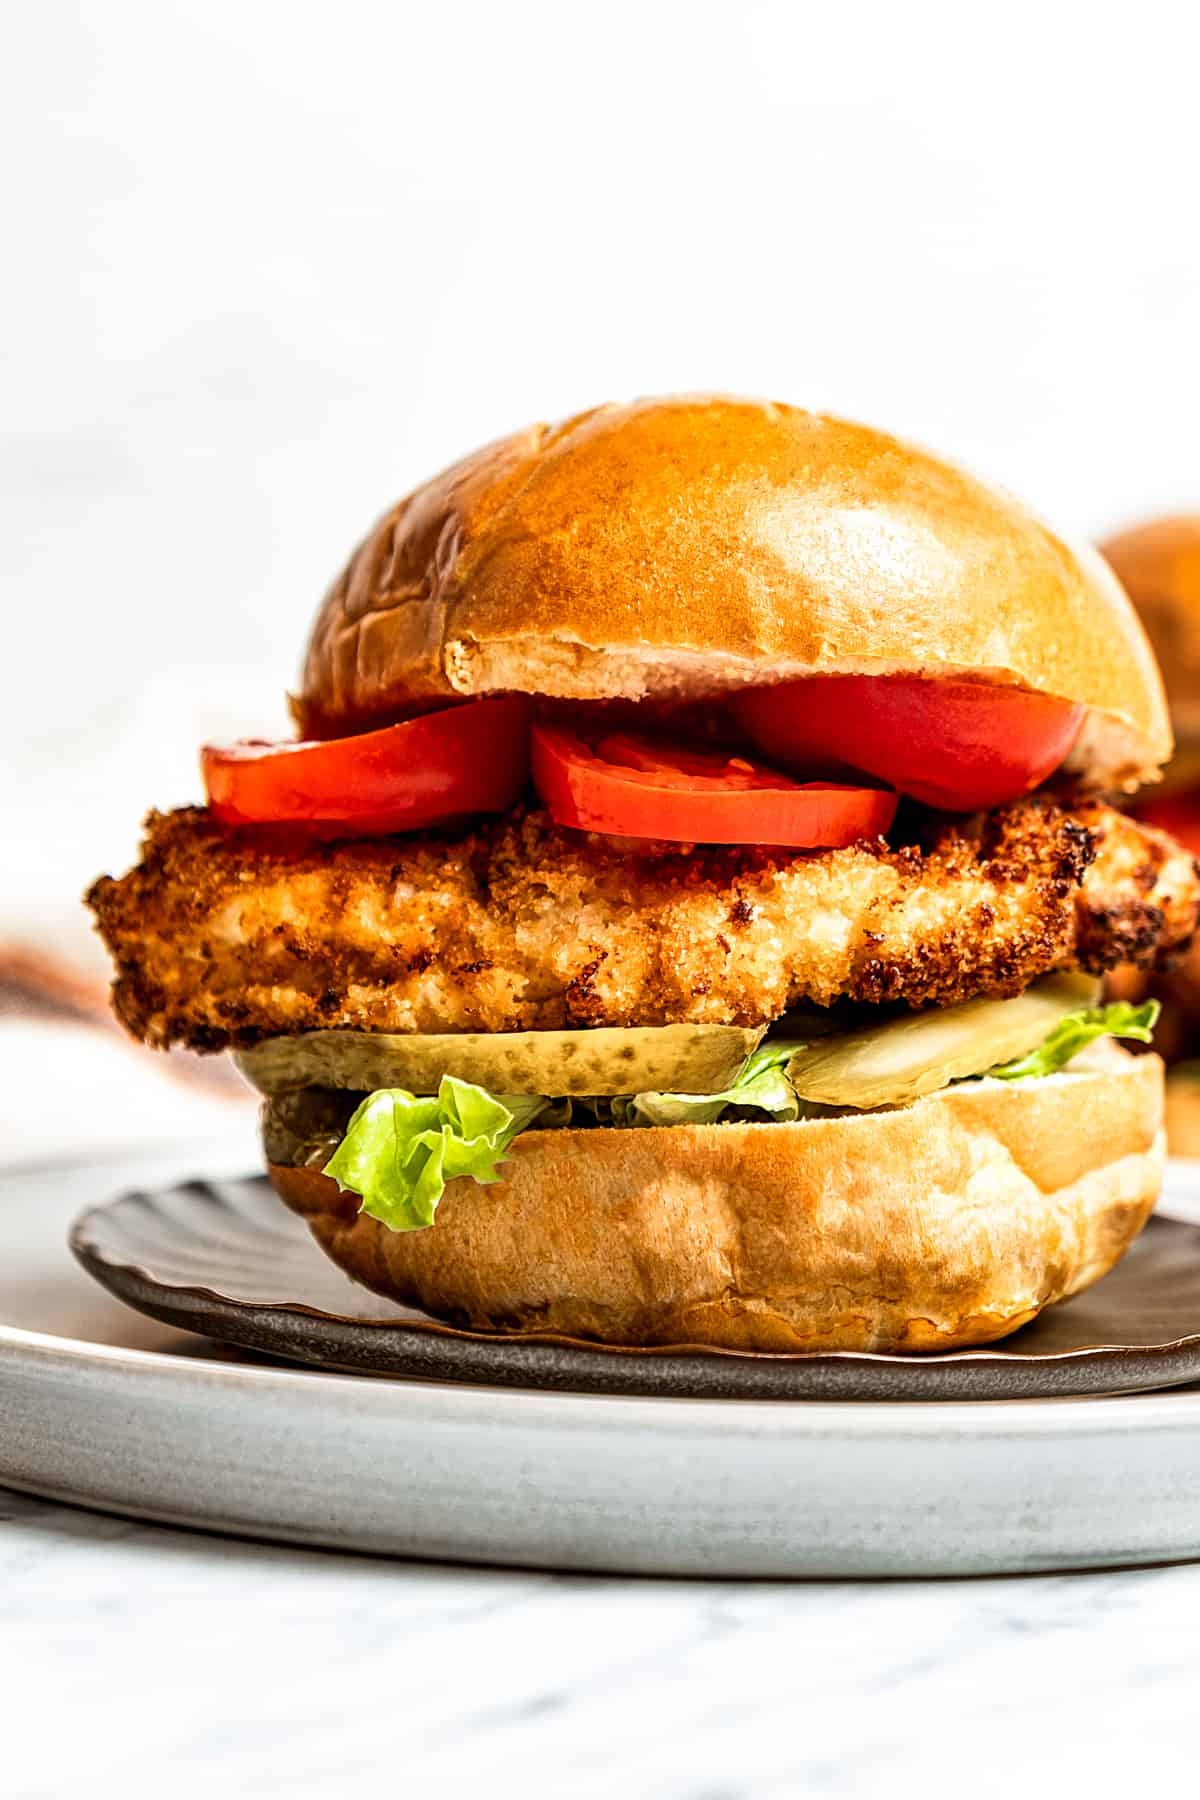 A fried chicken sandwich on a bun with lettuce, tomato, and pickles.